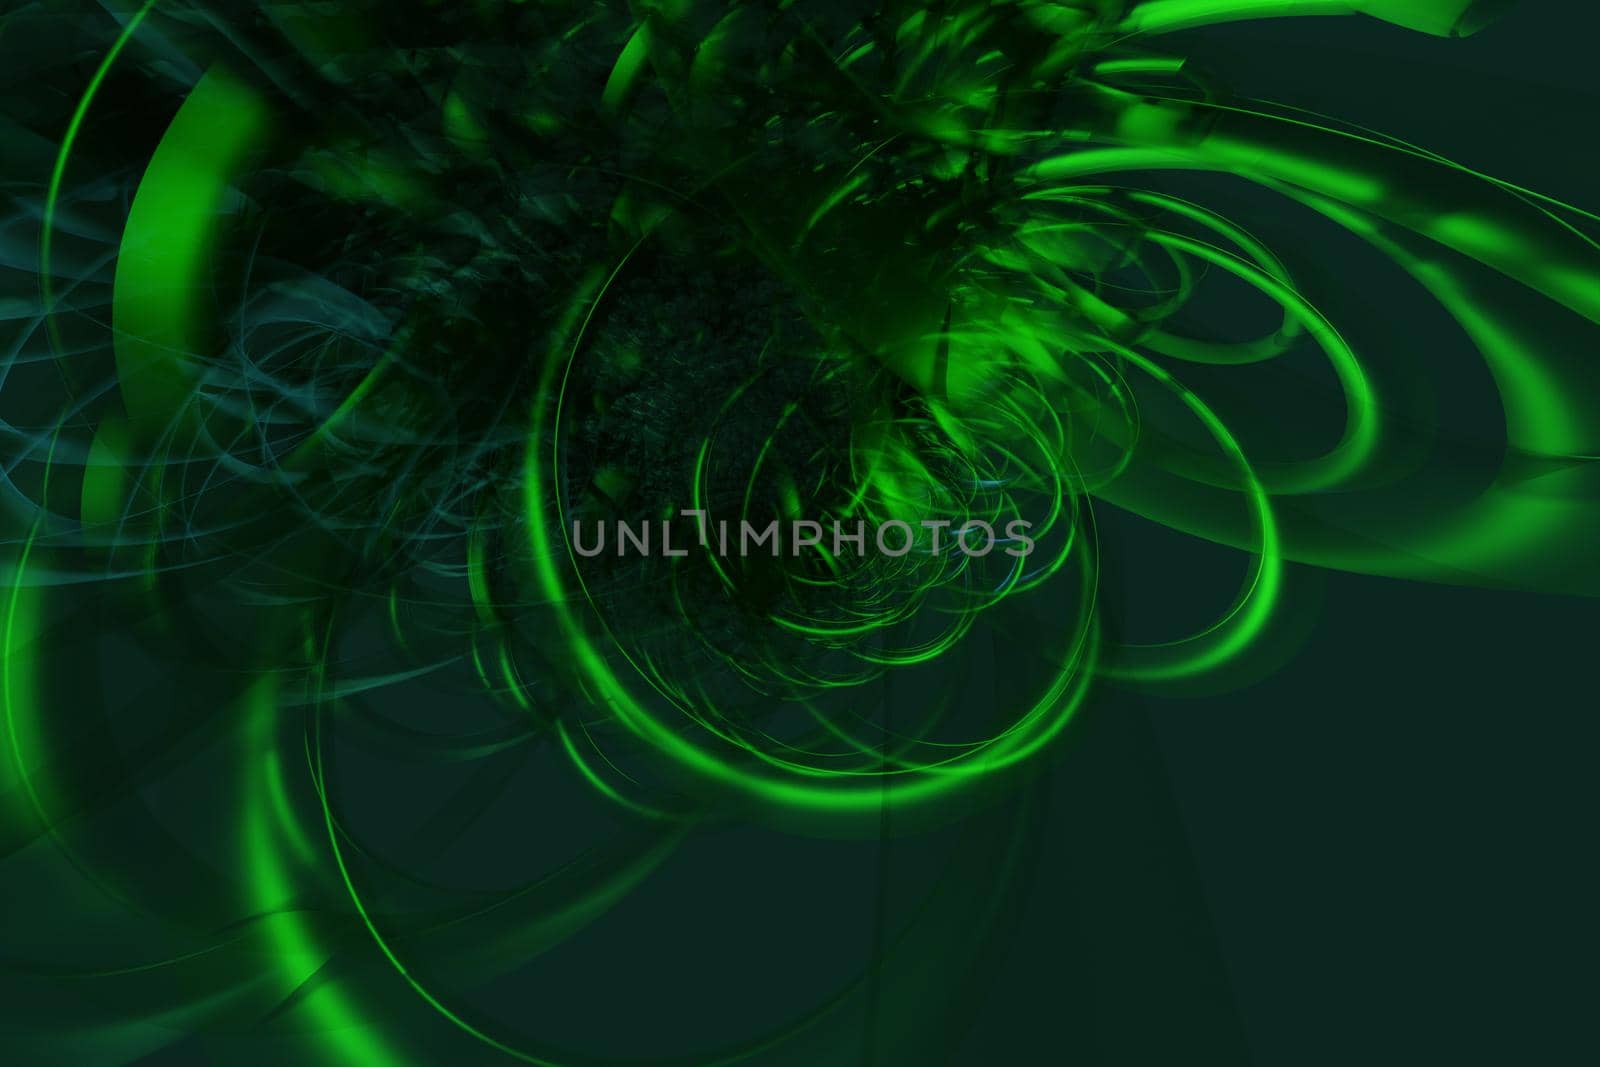 Abstract green 3d illustration - geometric background with waves, spirals and transparency effects